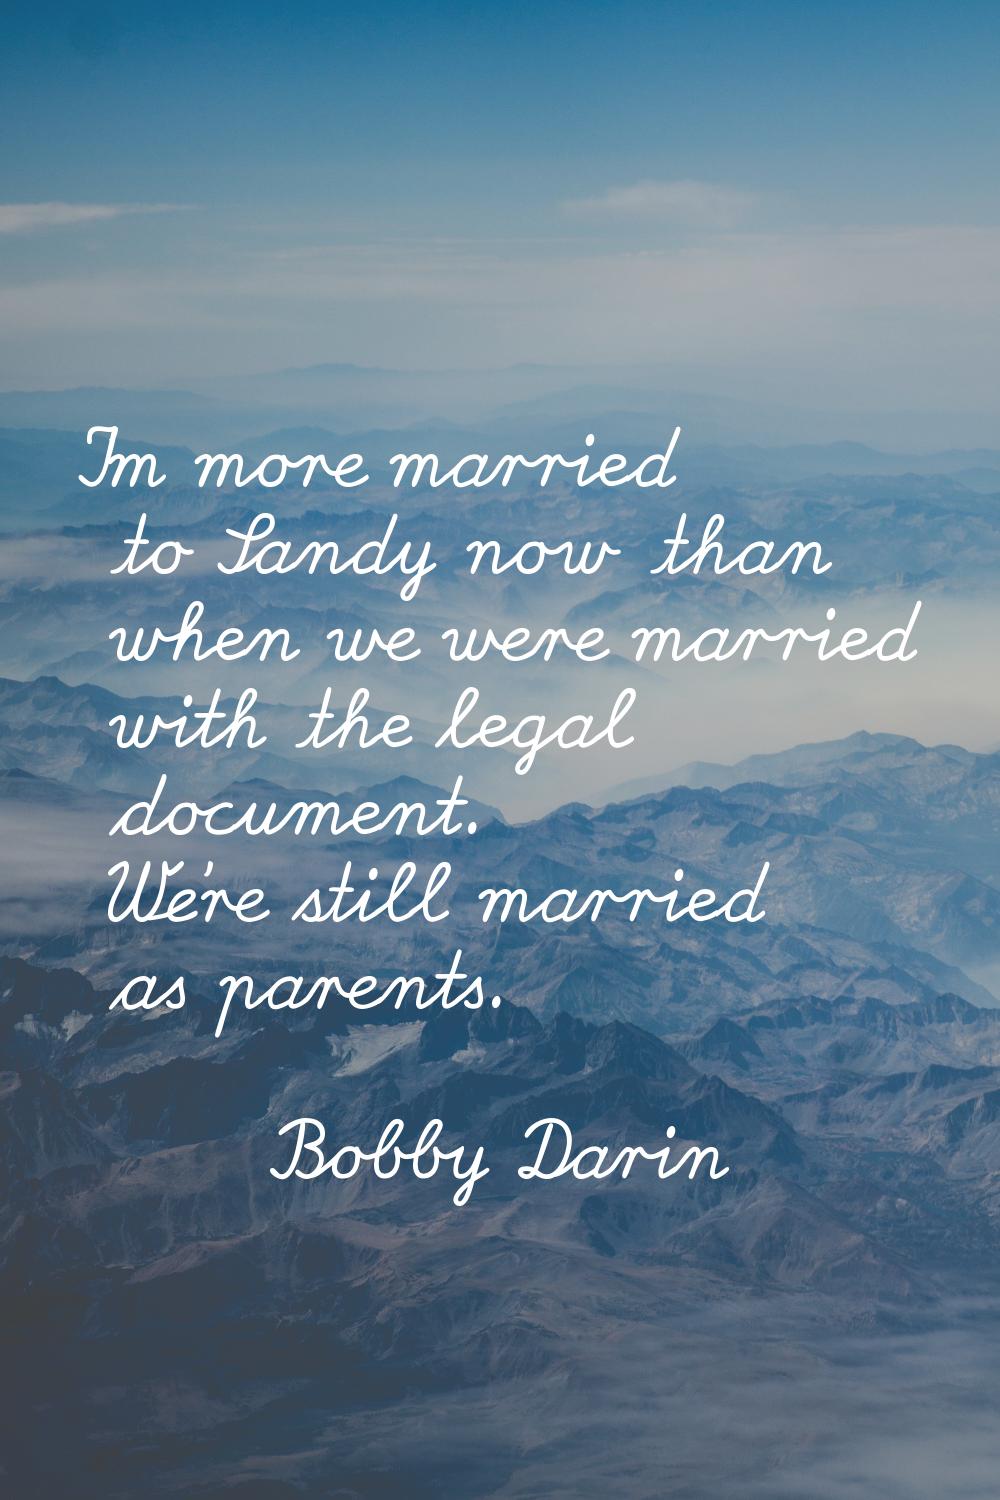 I'm more married to Sandy now than when we were married with the legal document. We're still marrie